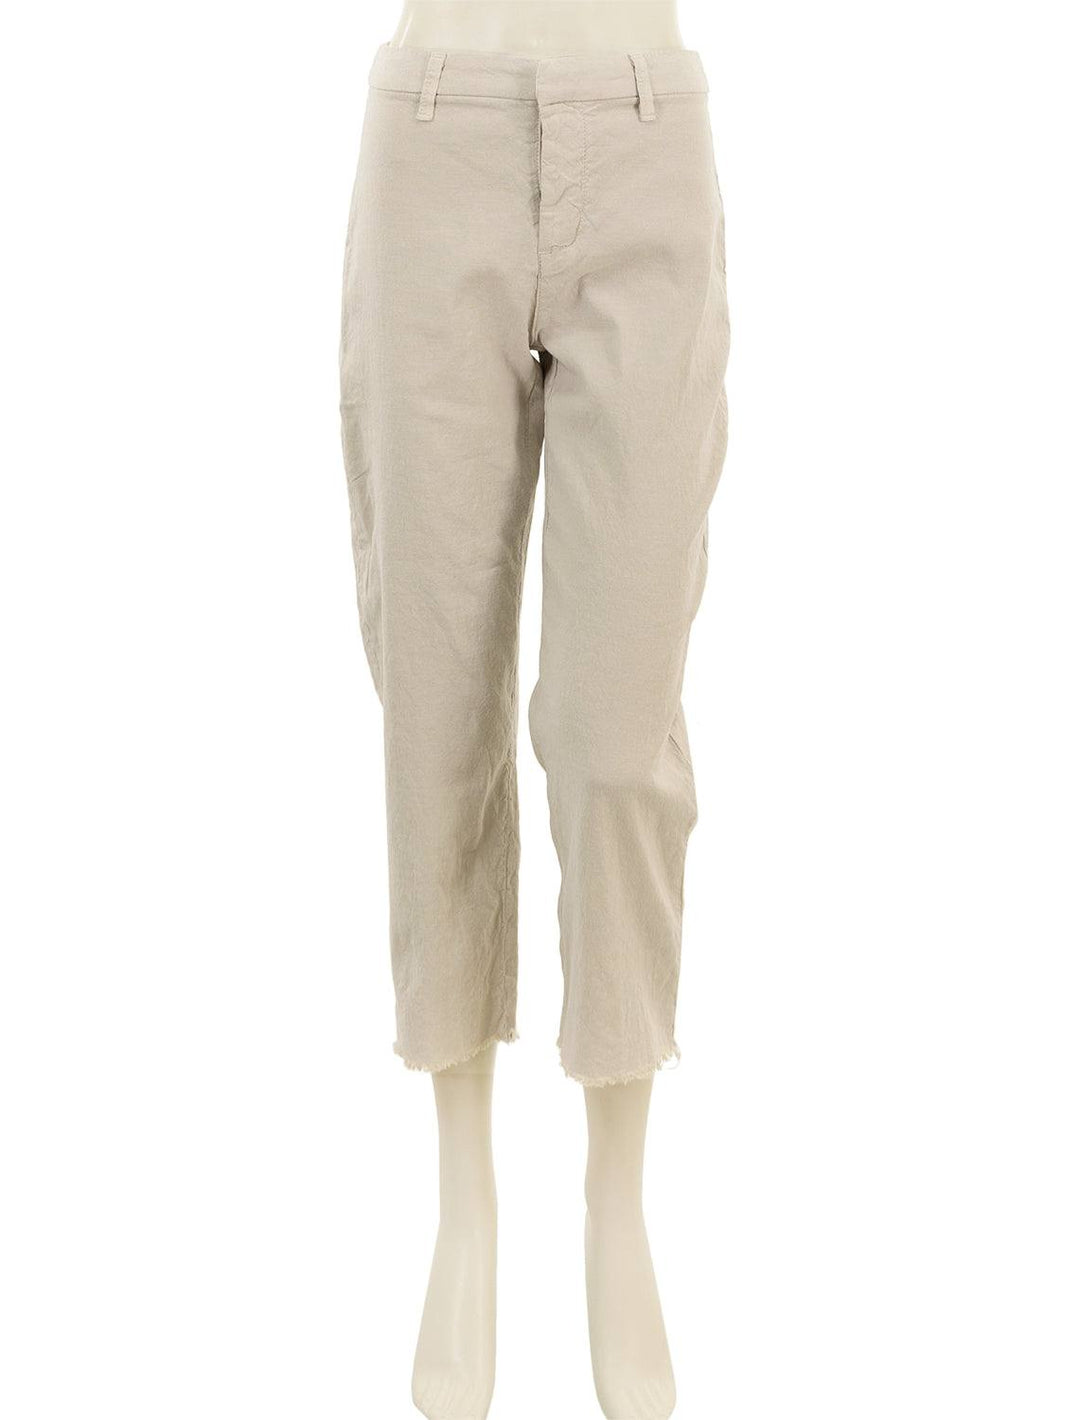 Front view of Frank & Eileen's kinsale pant in cement.